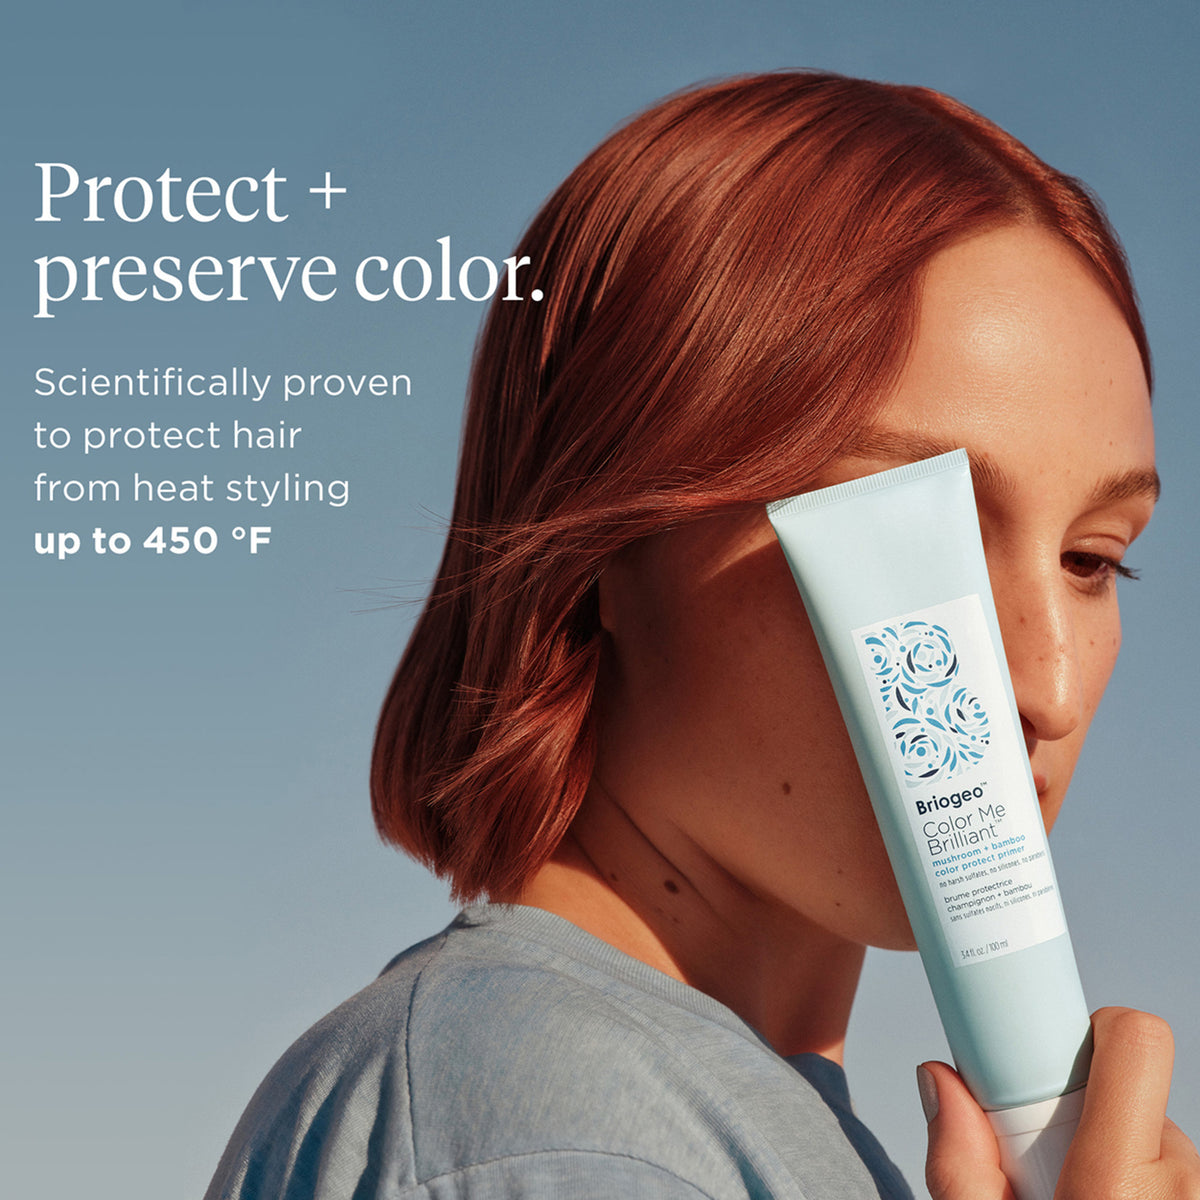 Briogeo Color Me Brilliant Mushroom and Bamboo Hair Color and Heat Protectant Primer .